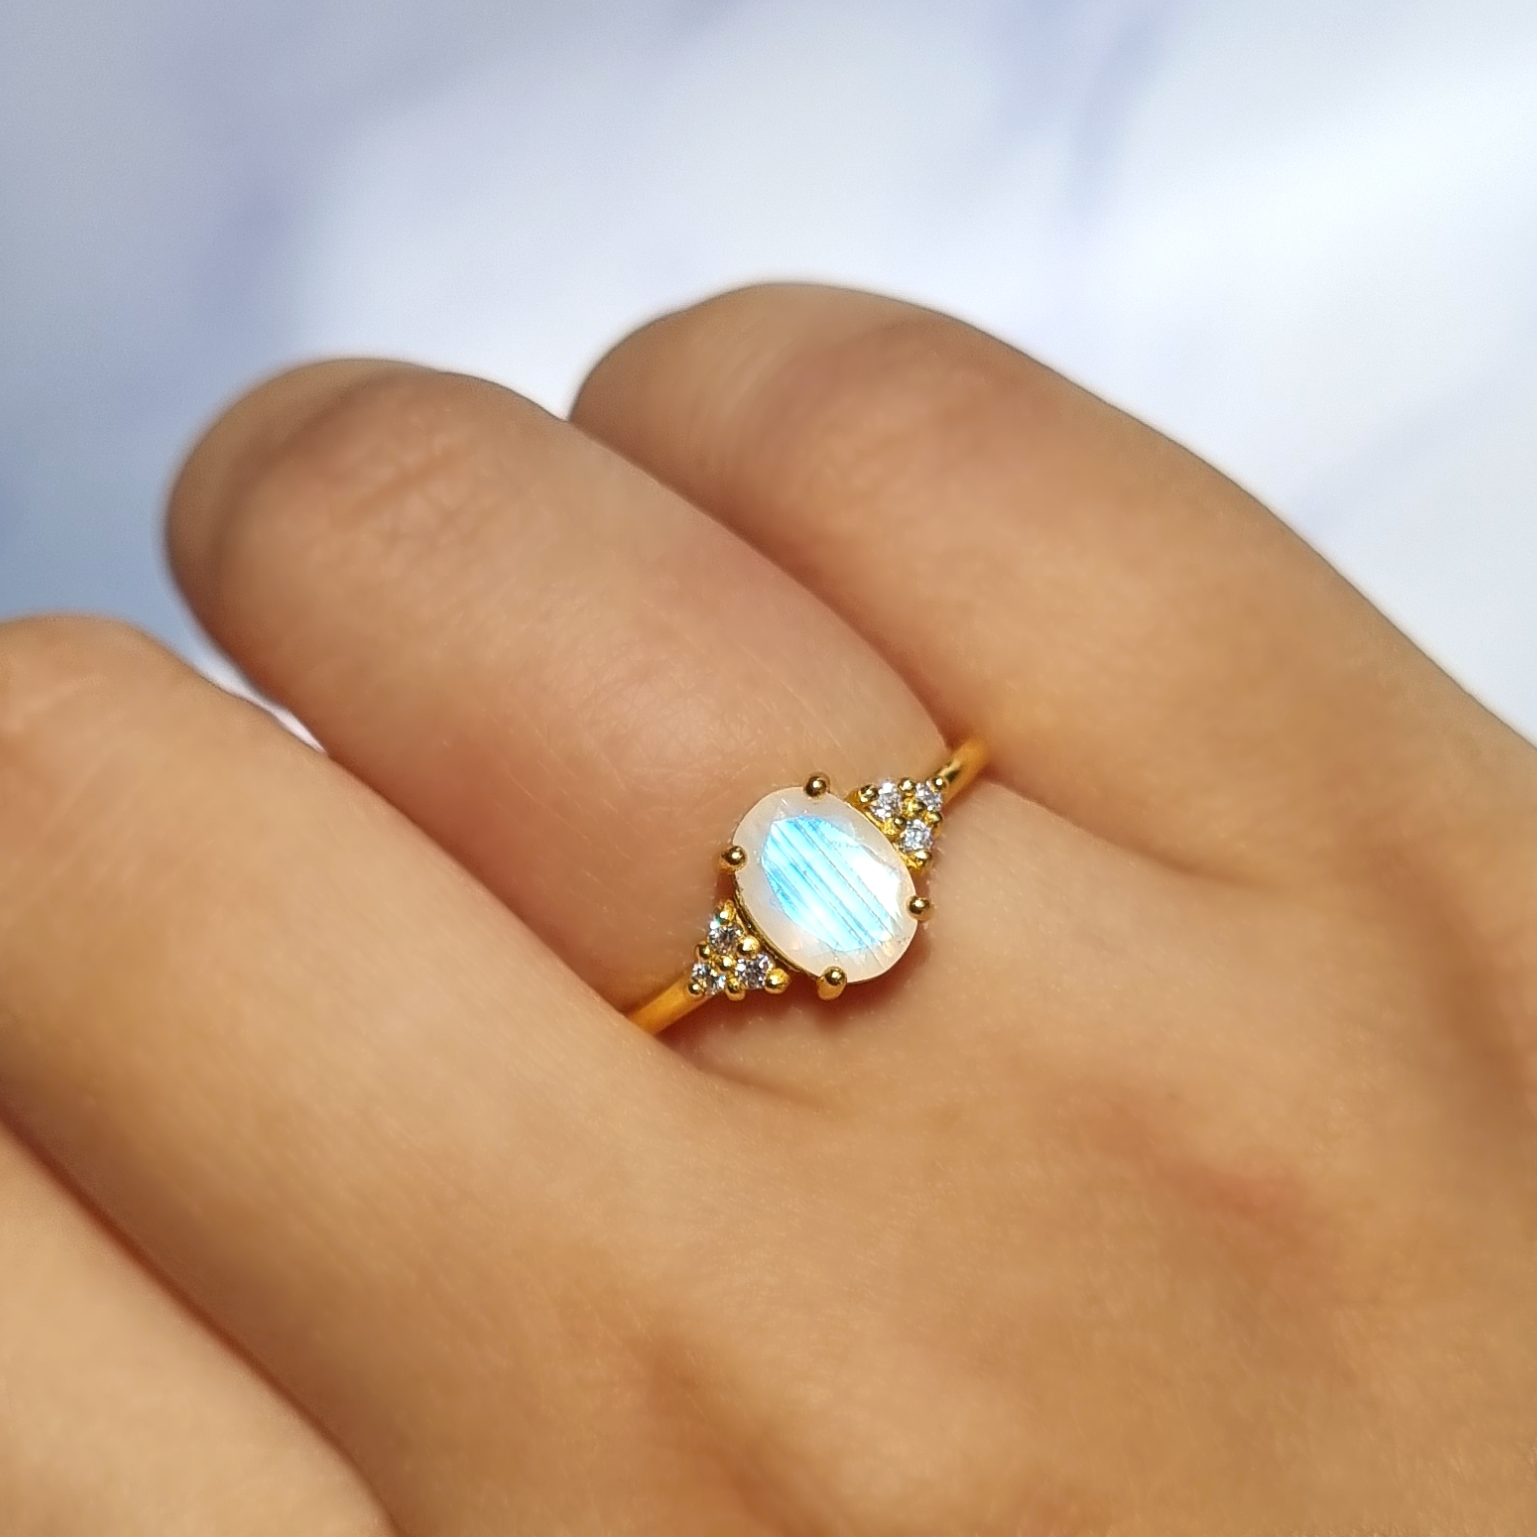 oval cut rainbow moonstone  engagement, promise and wedding ring  in 18k gold vermeil.